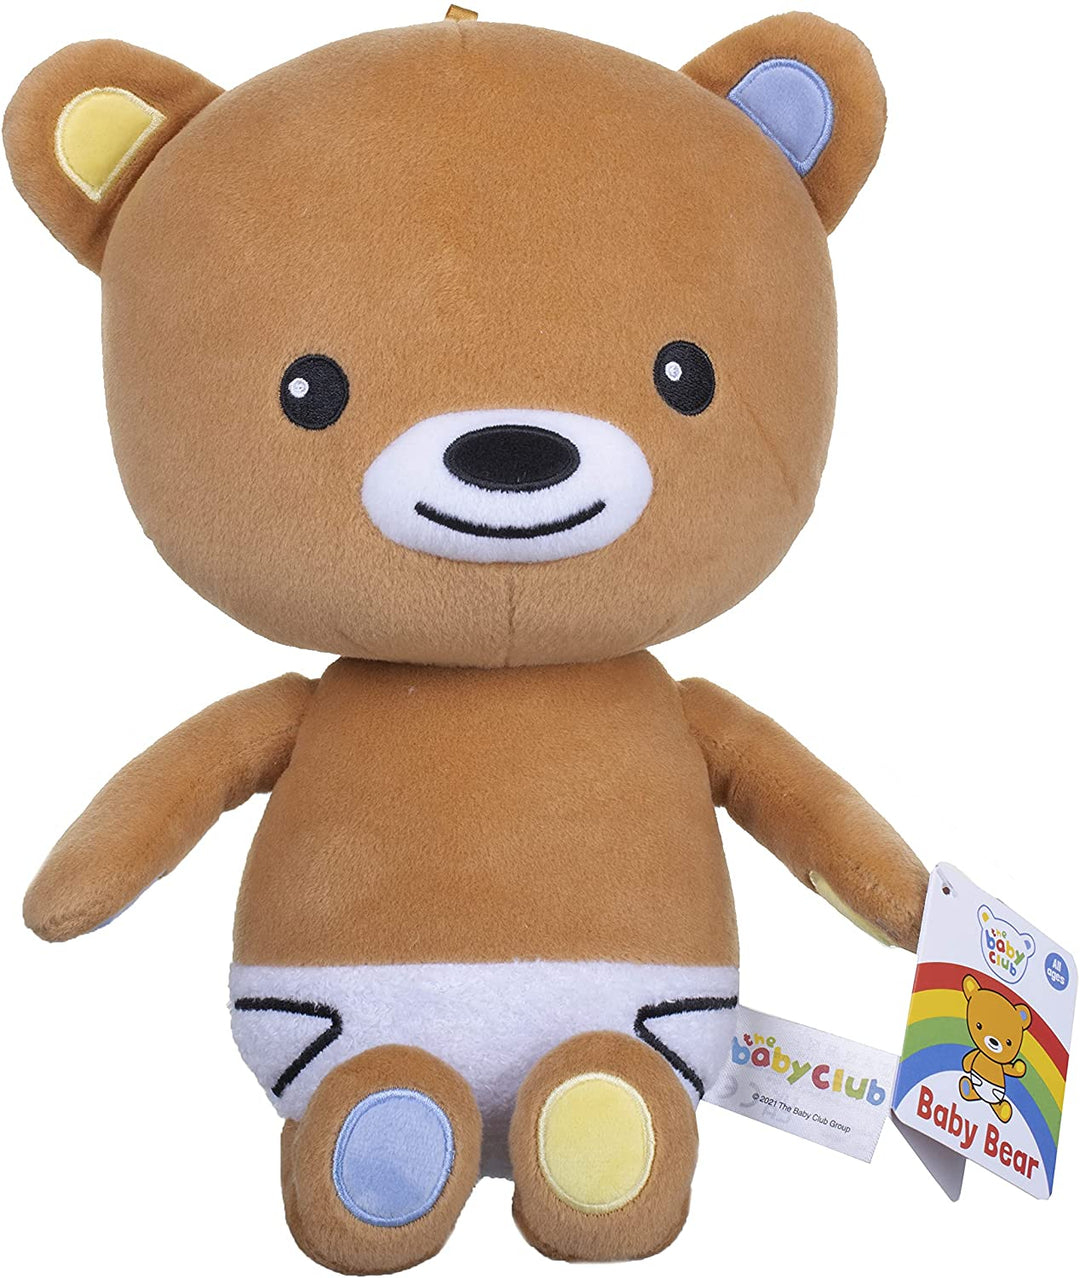 The Baby Club 3481ST Baby Bear Soft Toy